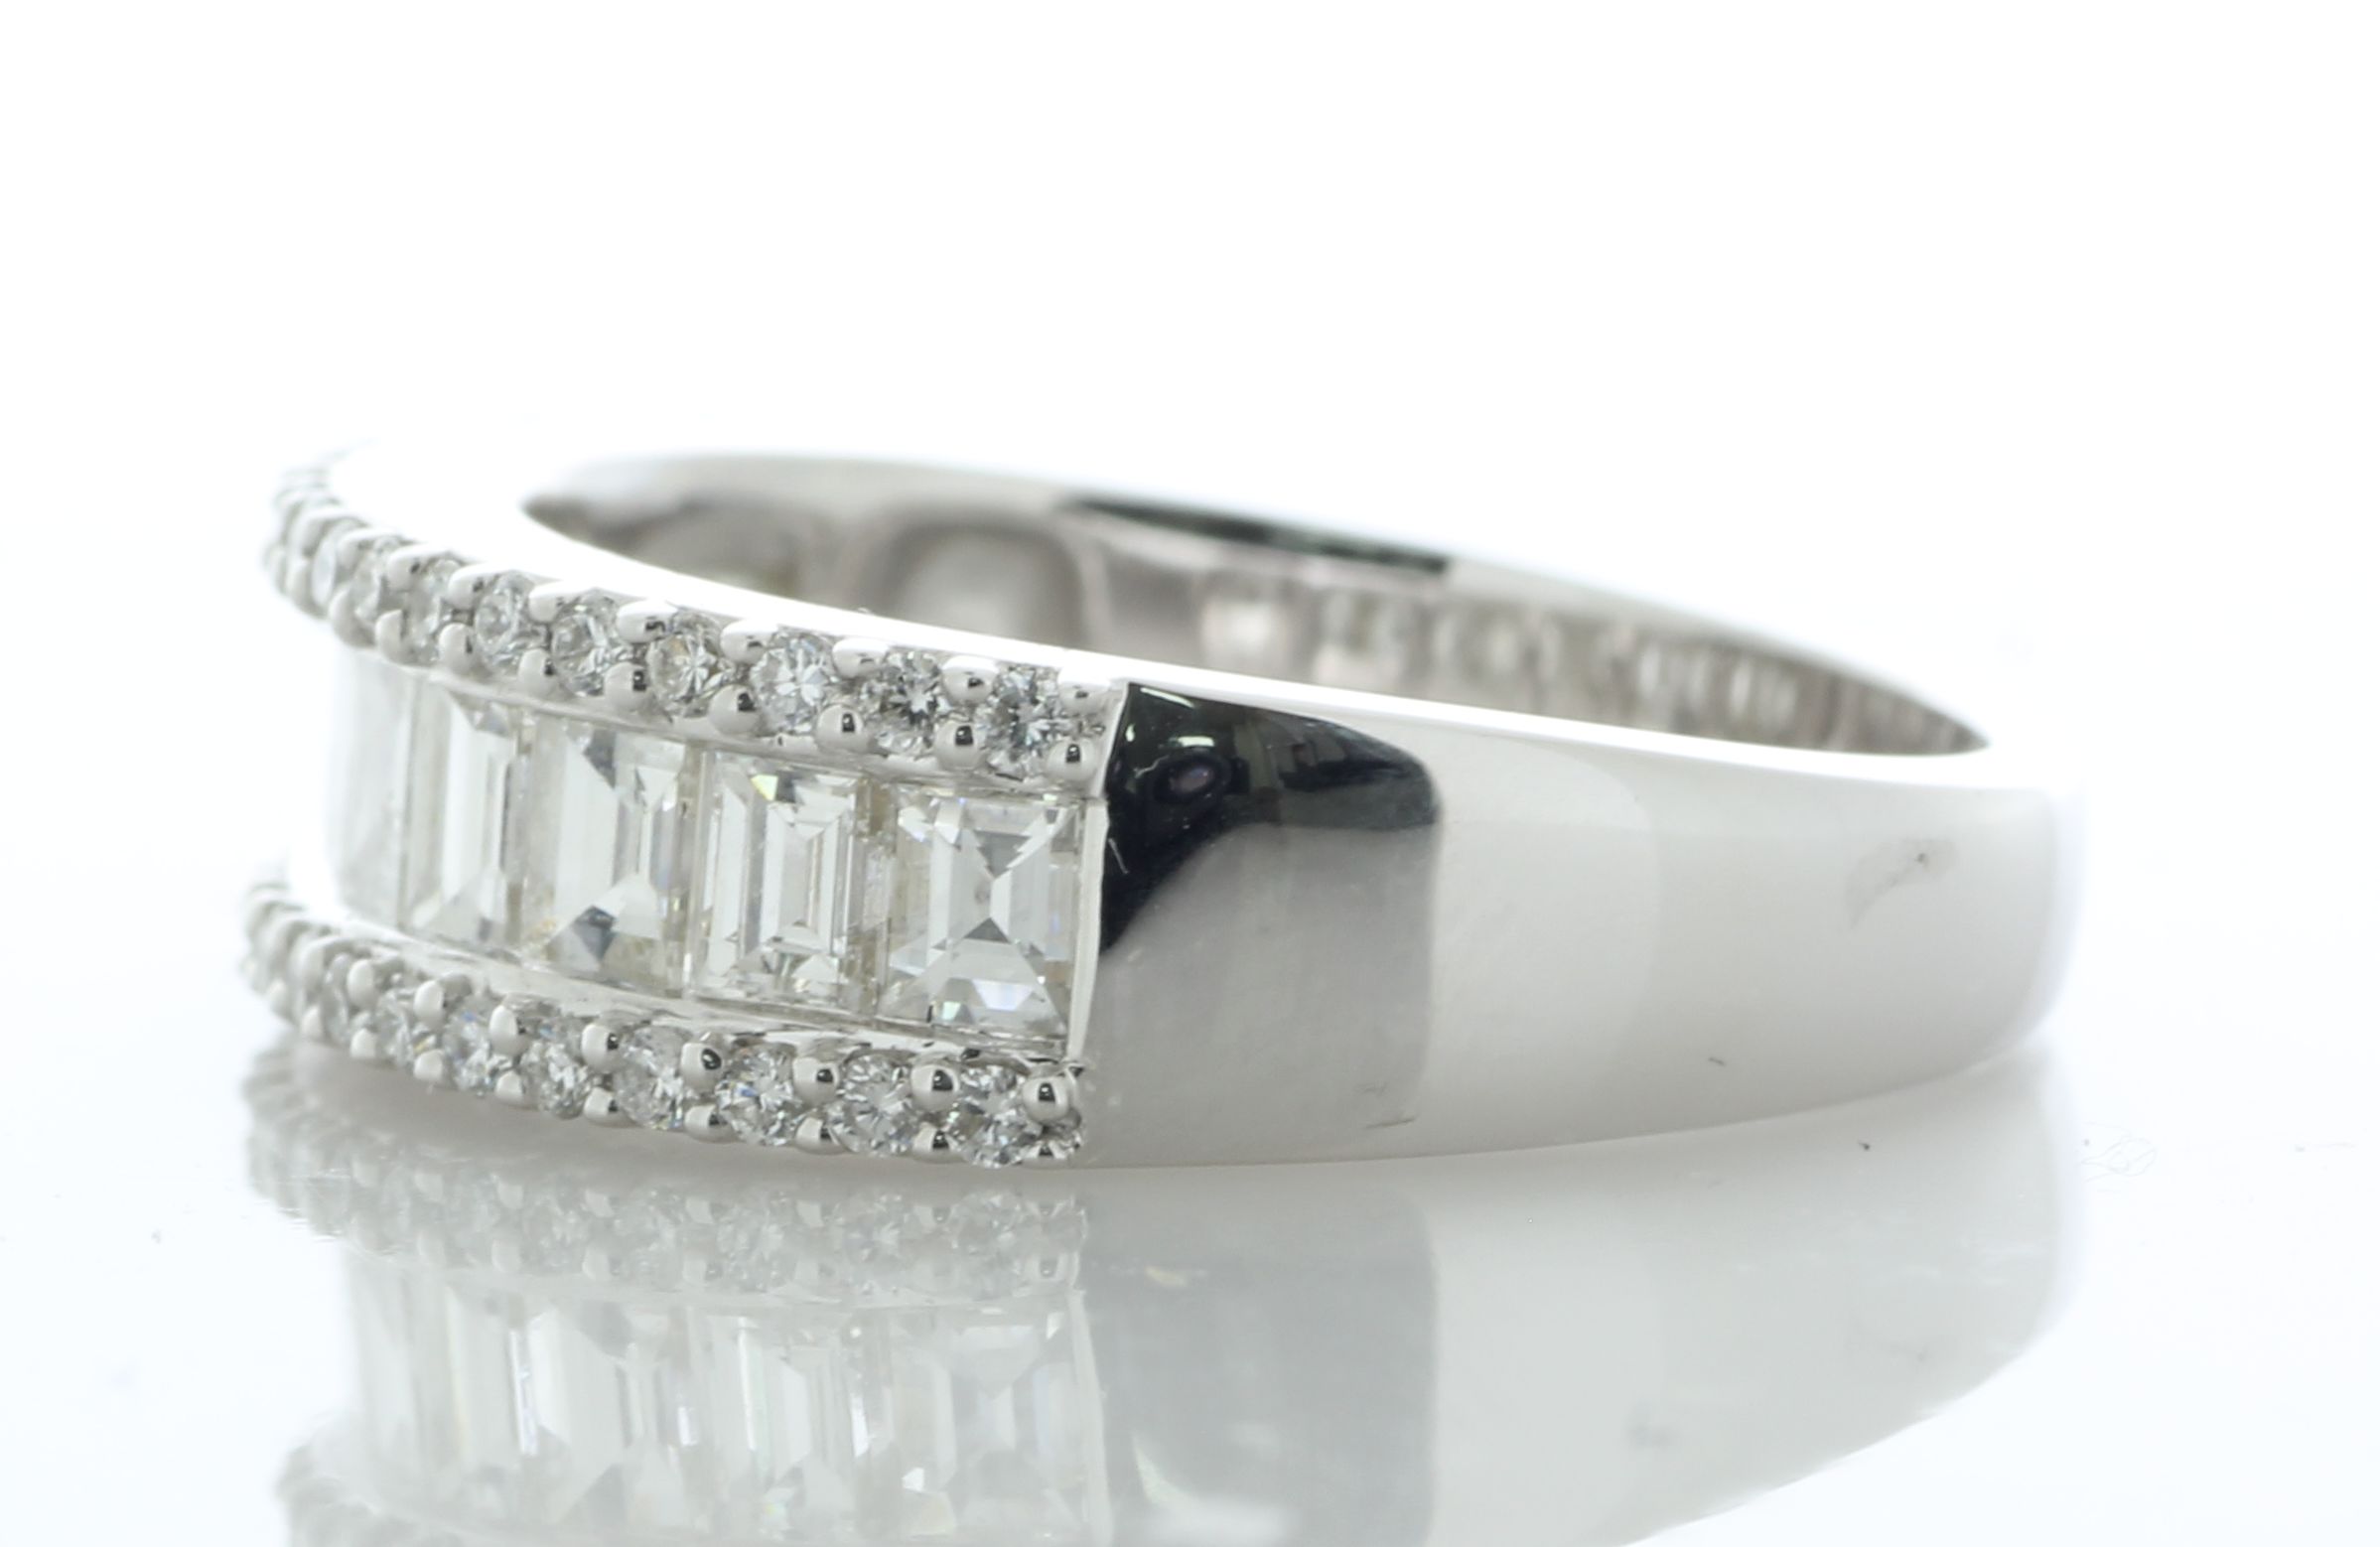 18ct White Gold Channel Set Semi Eternity Diamond Ring 1.37 Carats - Image 3 of 5